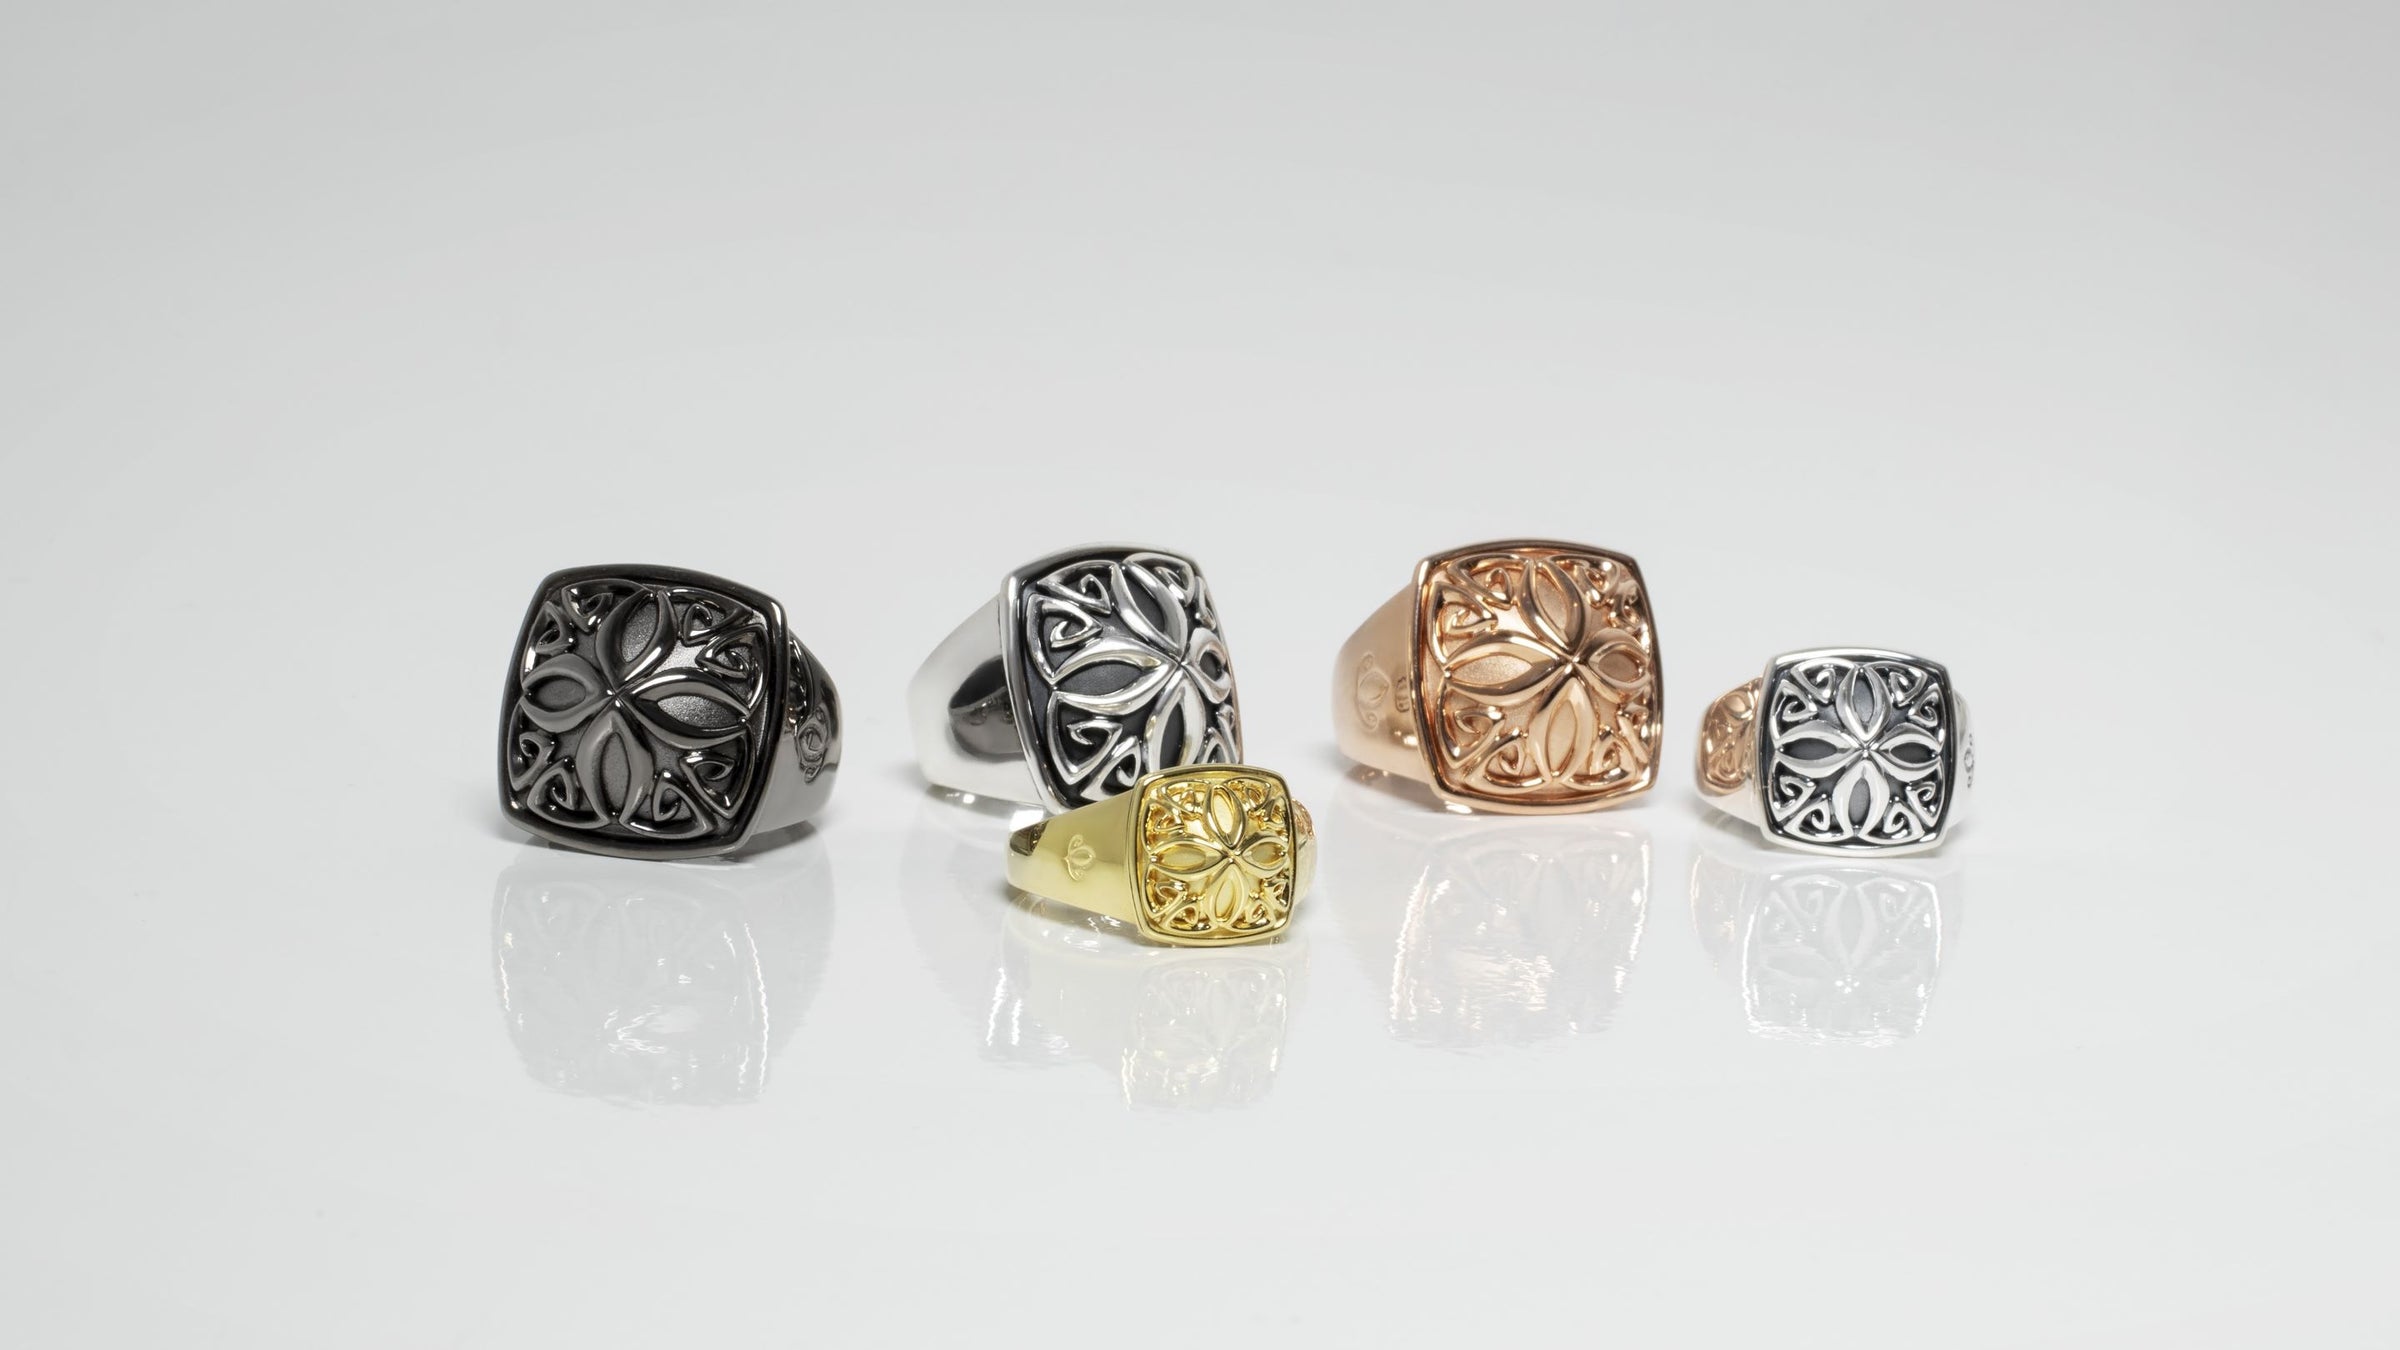 Array of Insignia signet rings in silver, gold, rose gold and black ruthenium